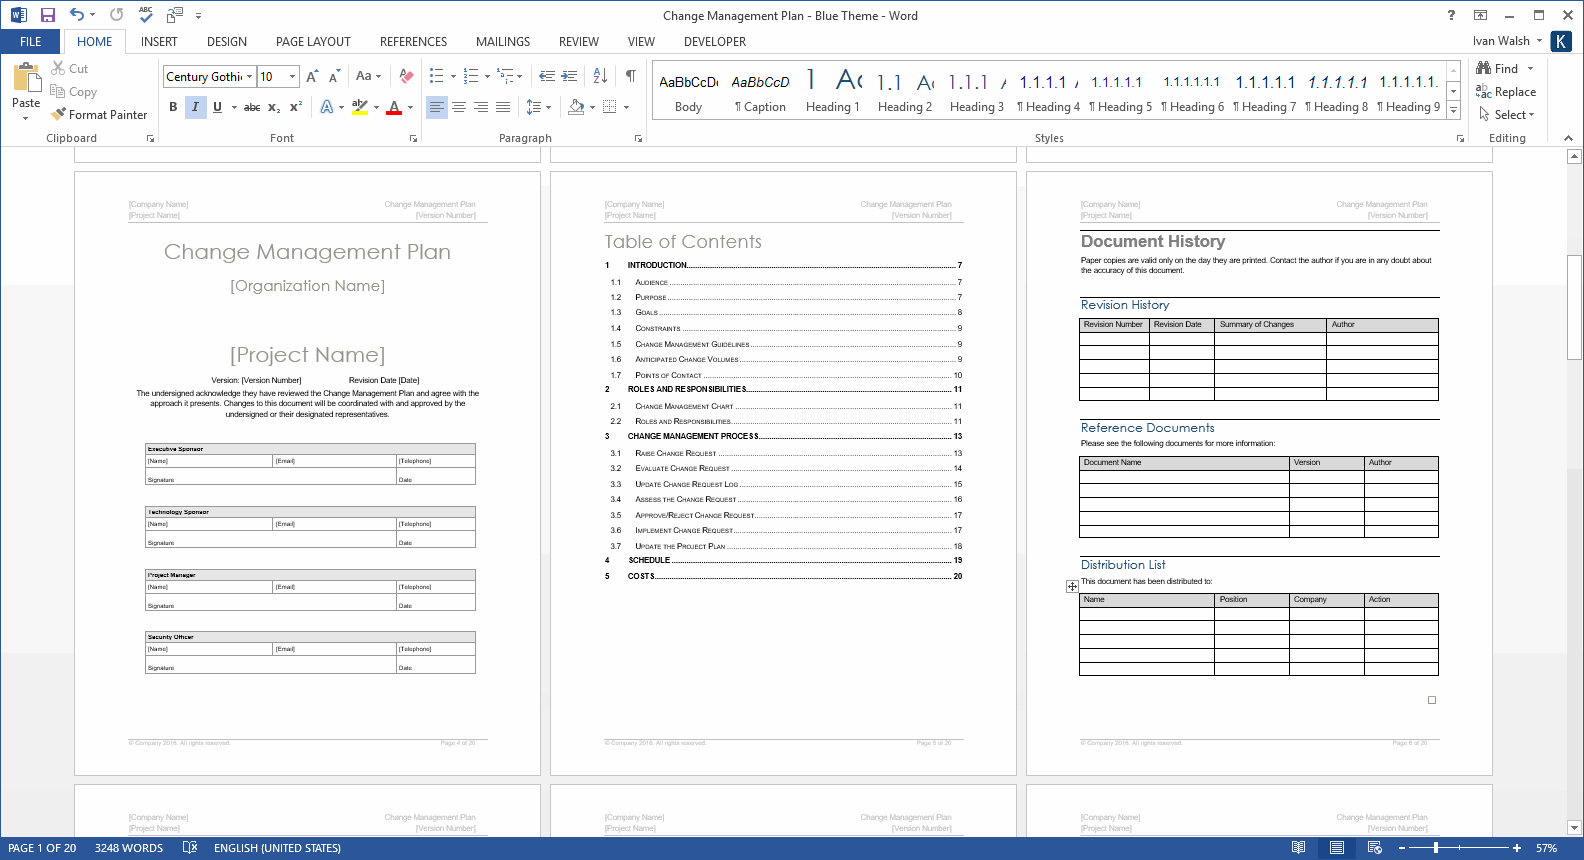 excel cover sheet template